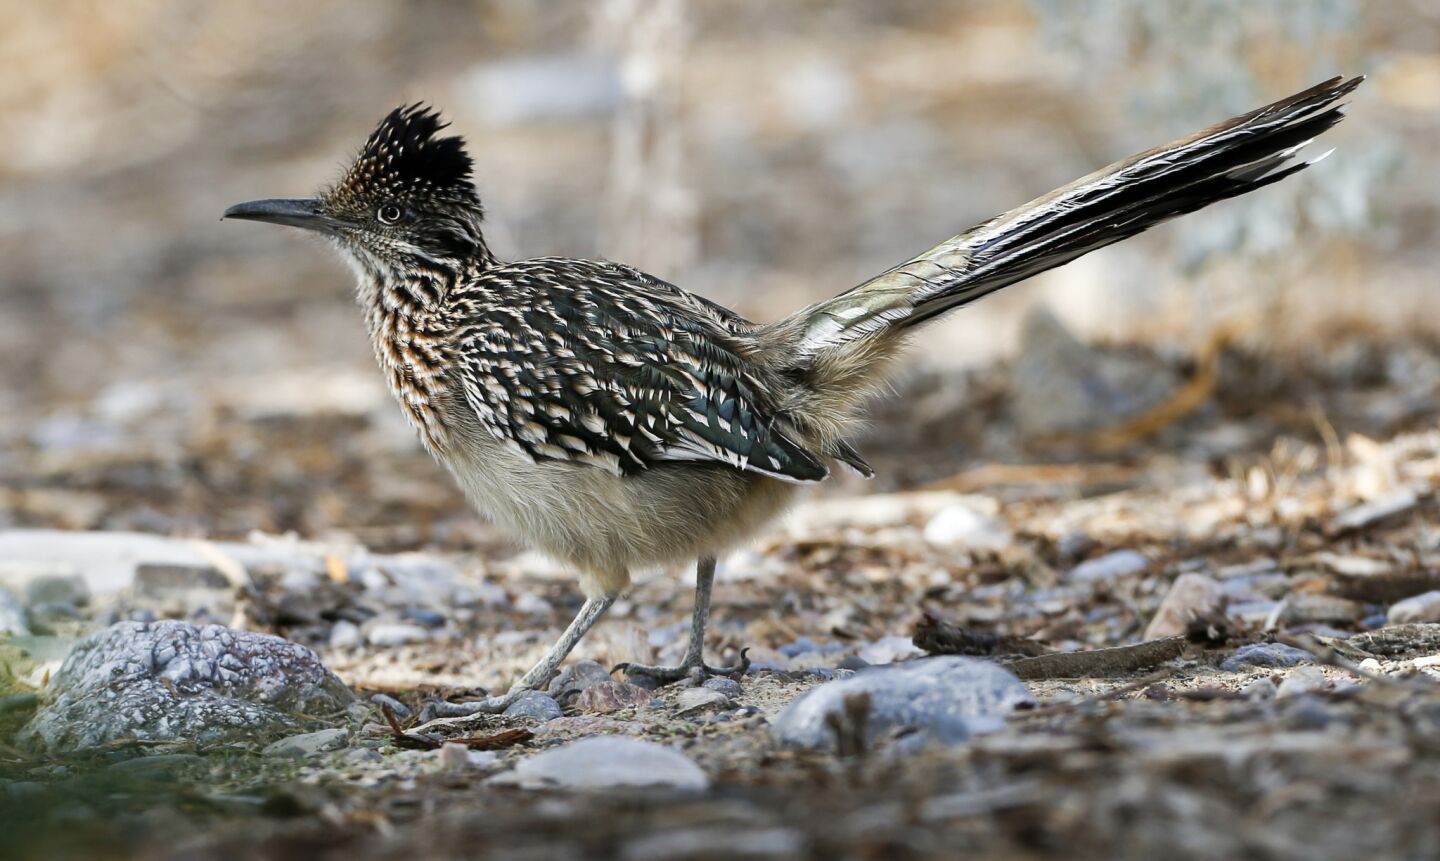 A roadrunner scampers across the grounds of the Inn at Furnace Creek.